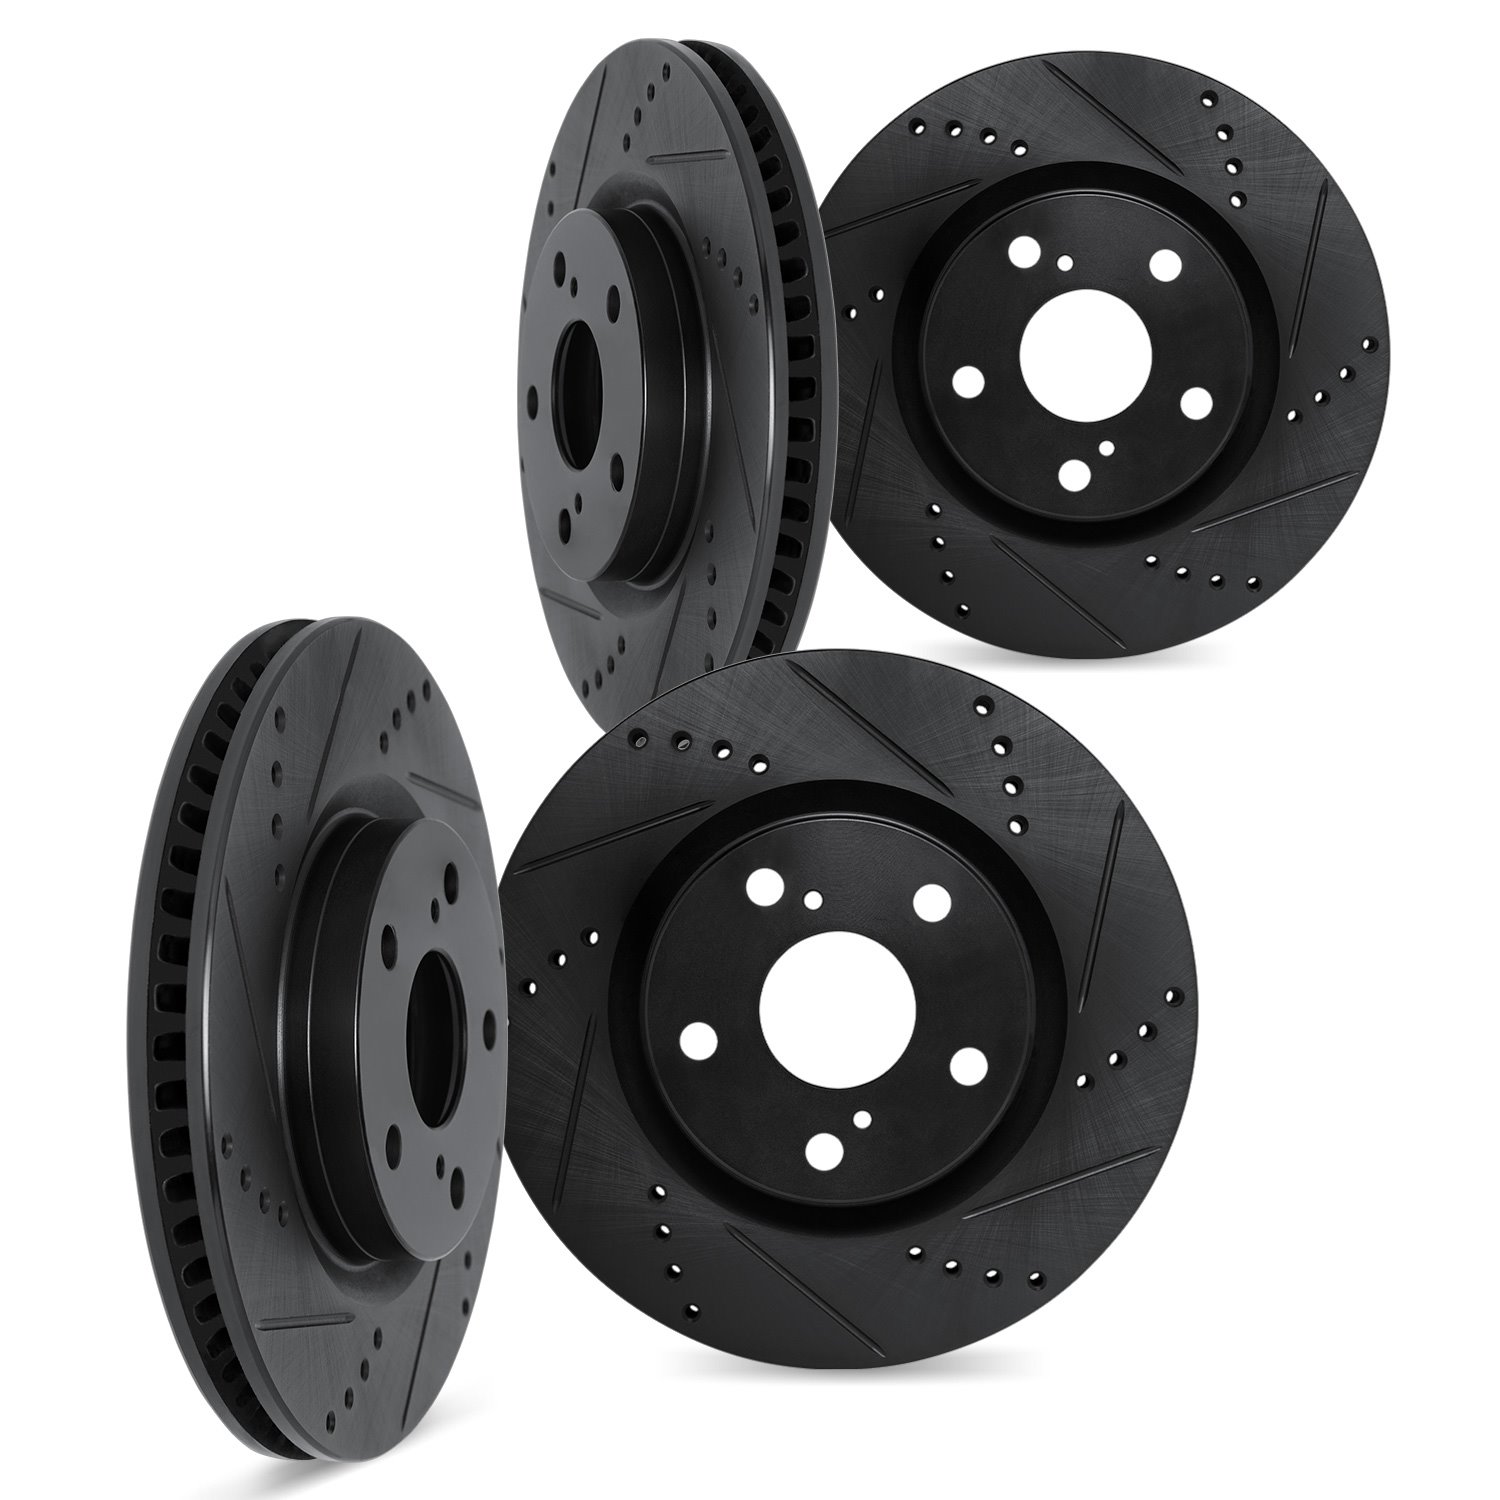 8004-58018 Drilled/Slotted Brake Rotors [Black], 2005-2012 Acura/Honda, Position: Front and Rear